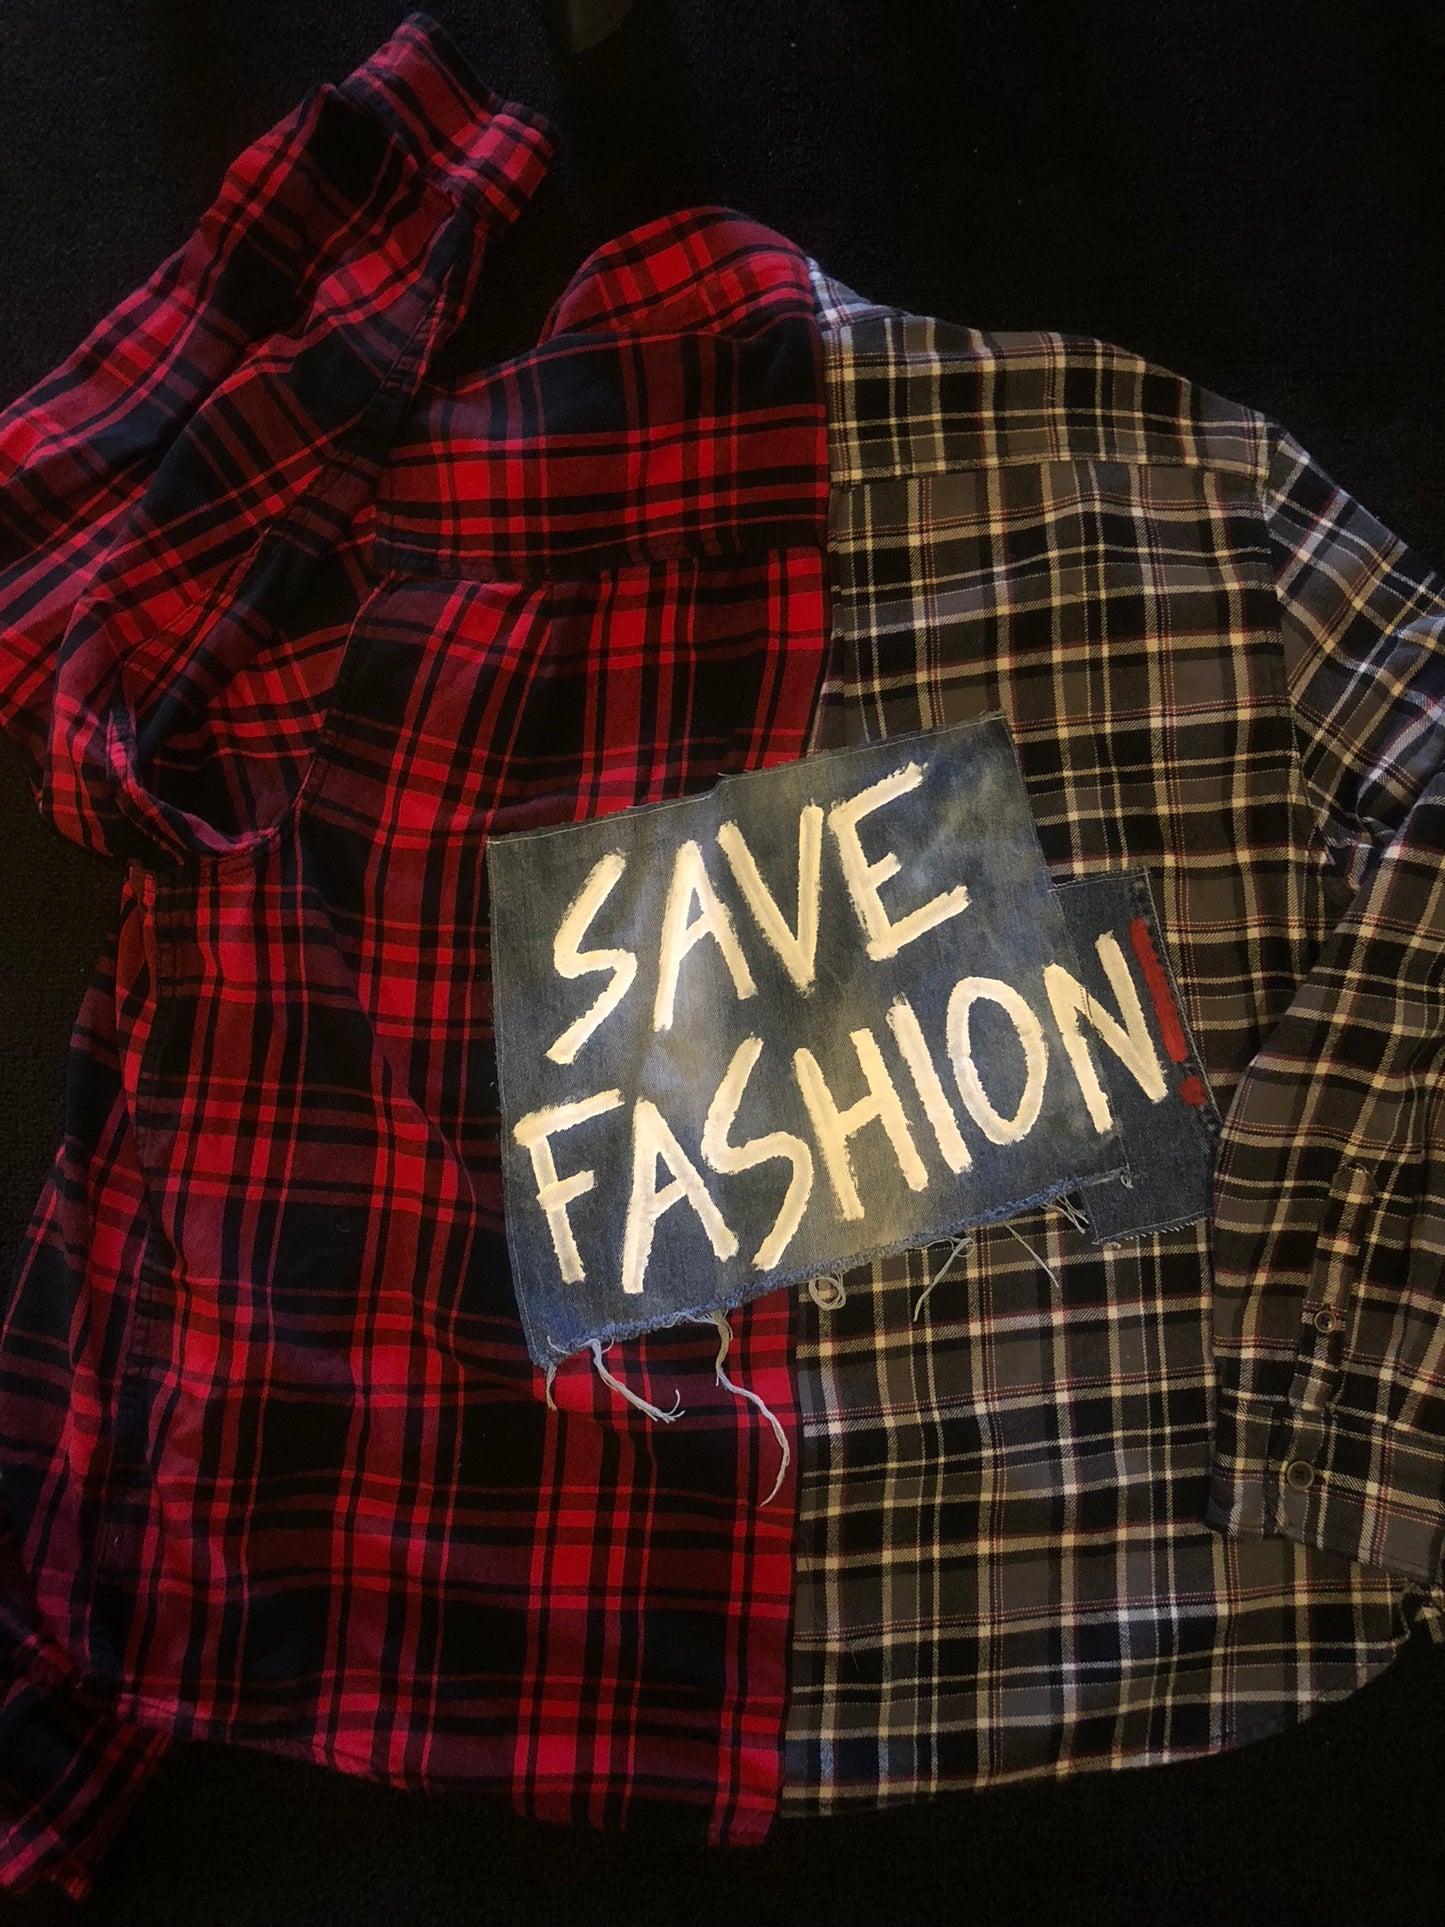 SAVE FASHION Oversized Flannel